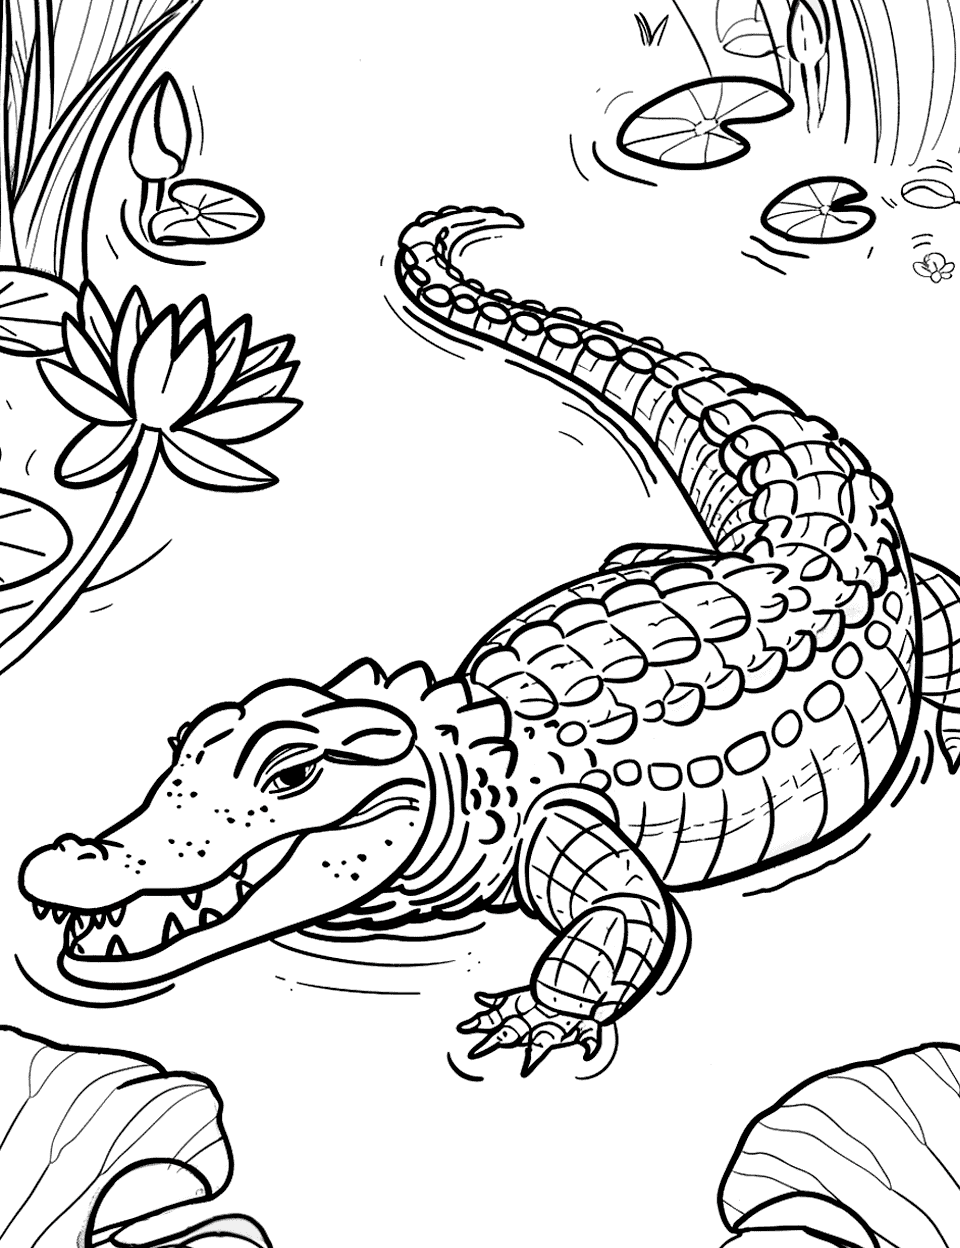 Chinese Alligator in a River Coloring Page - A Chinese alligator swimming in a peaceful river with lotus flowers floating nearby.